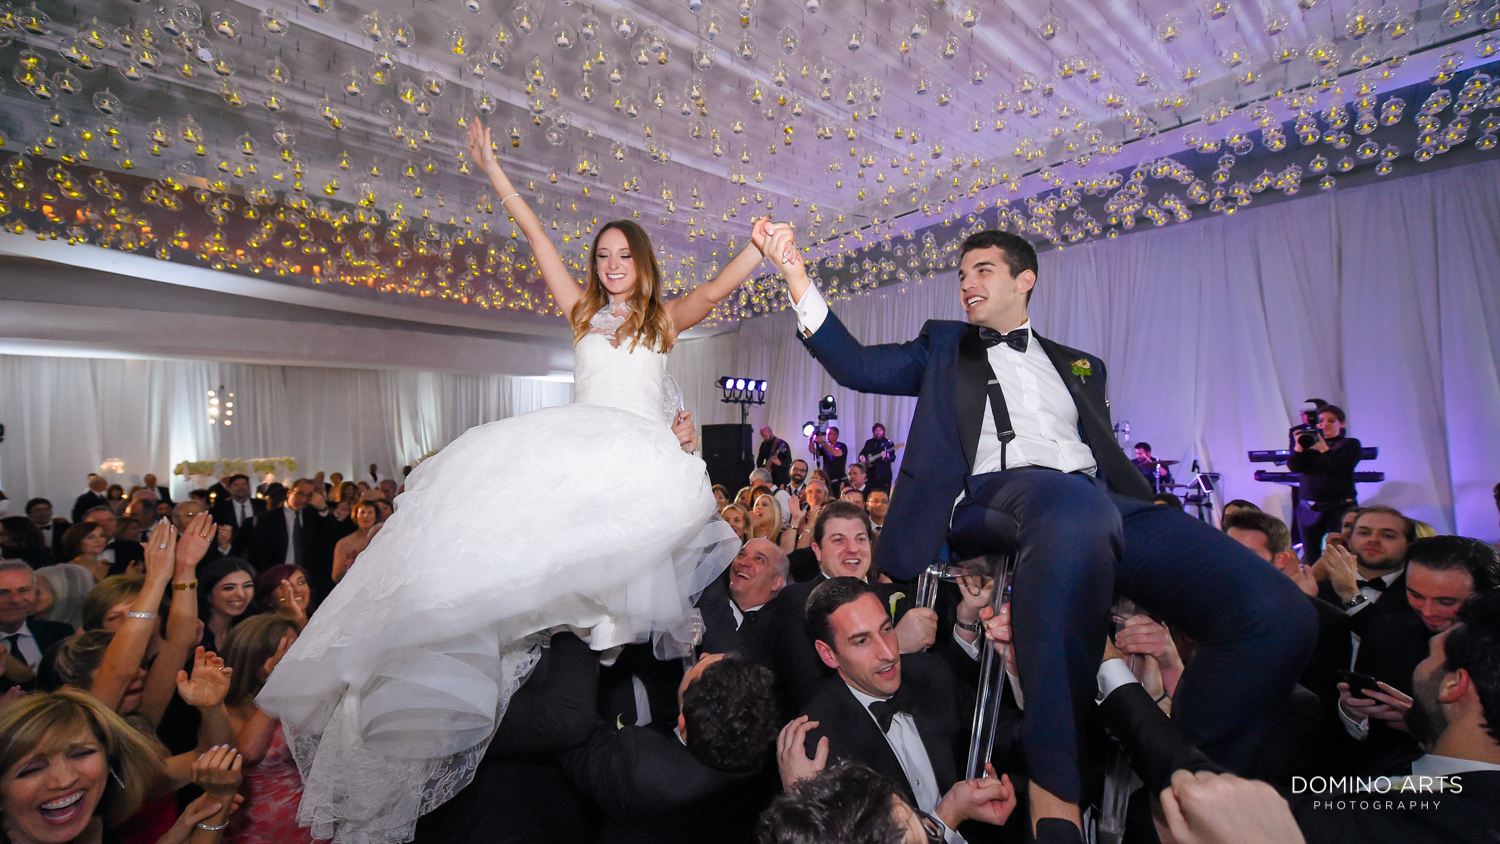 Fun hora at jewish wedding party pictures at fontainebleau miami